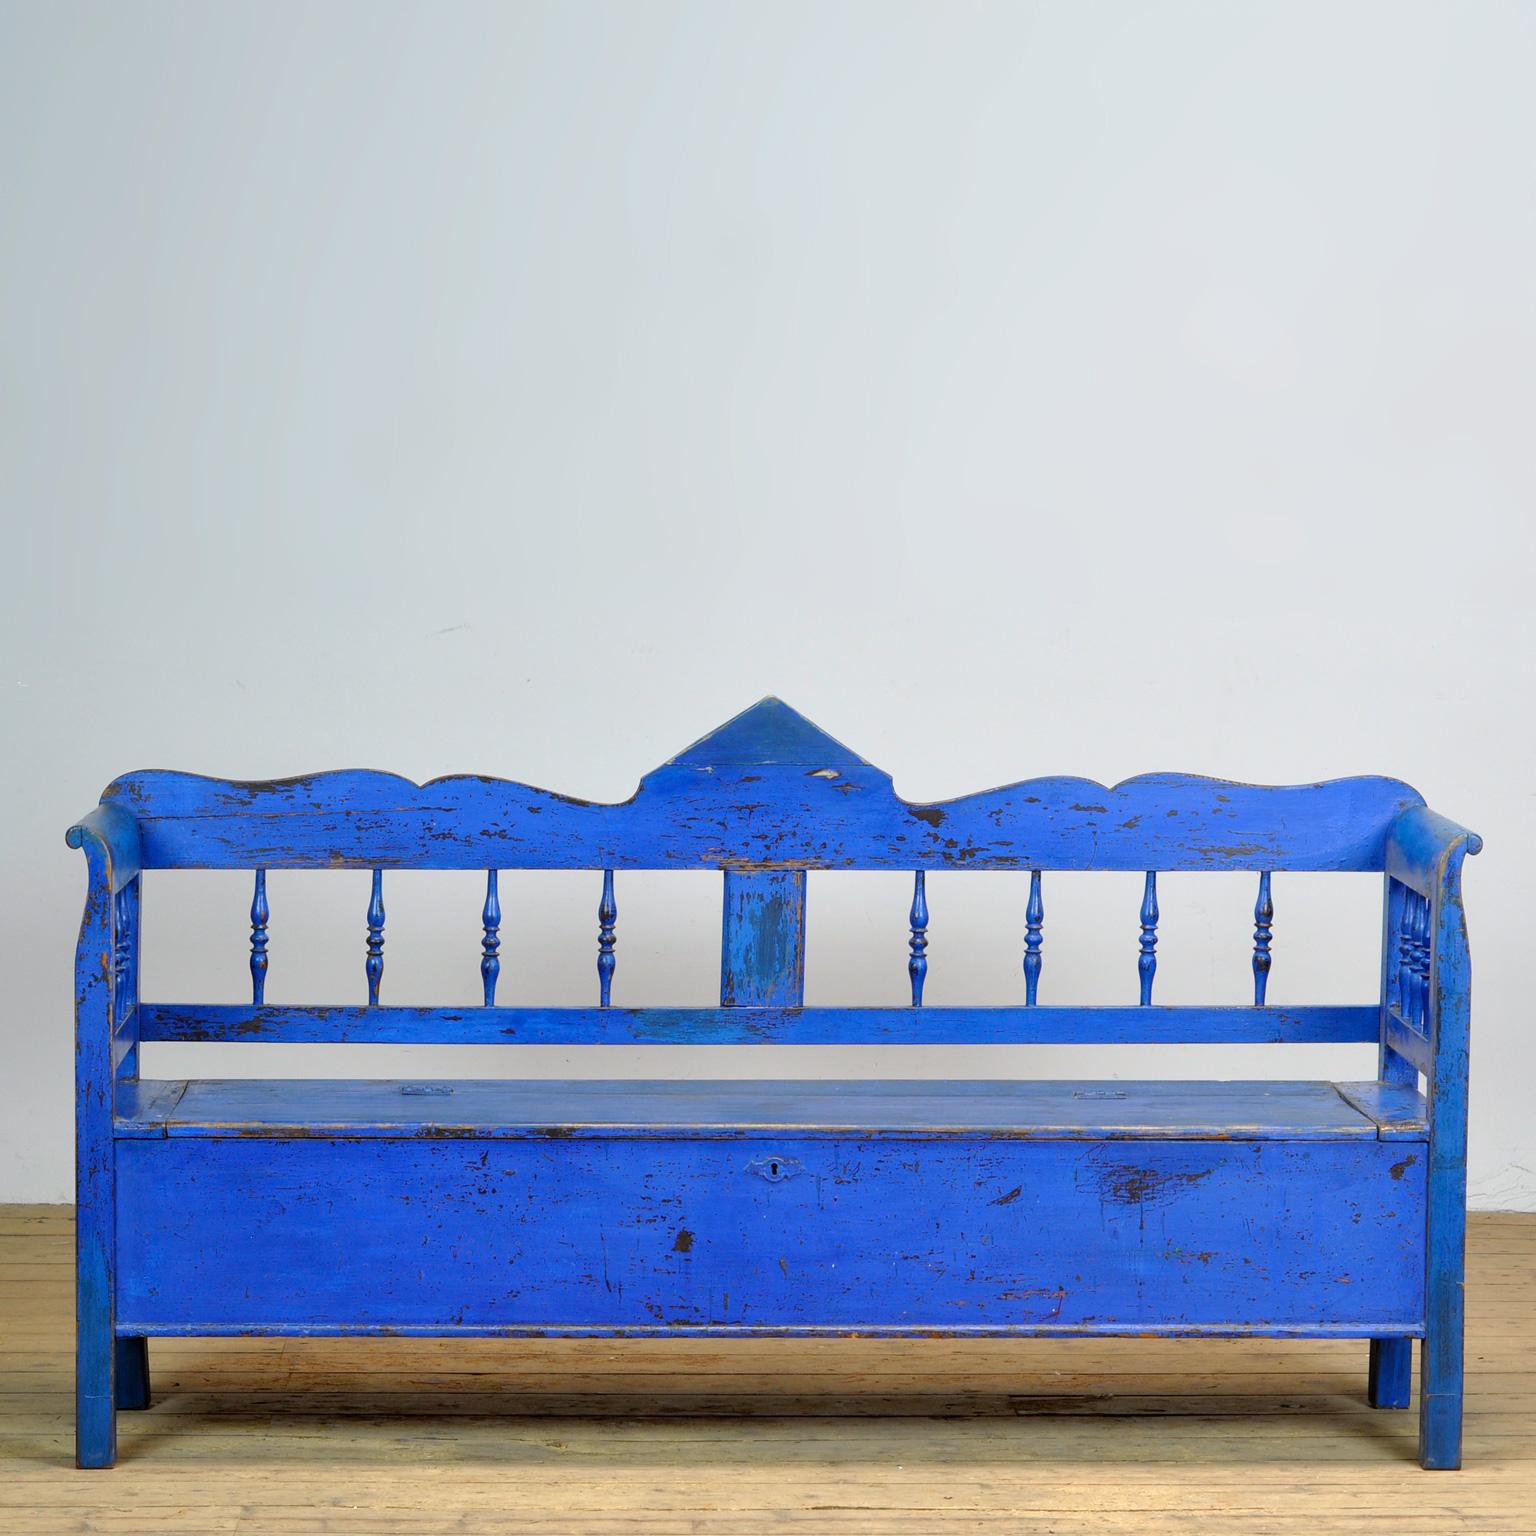 A charming bench from hungary with the original paint. Over time and use, the blue paint has been worn away in places to the wood. The bench is stable and sturdy. Free of woodworm.